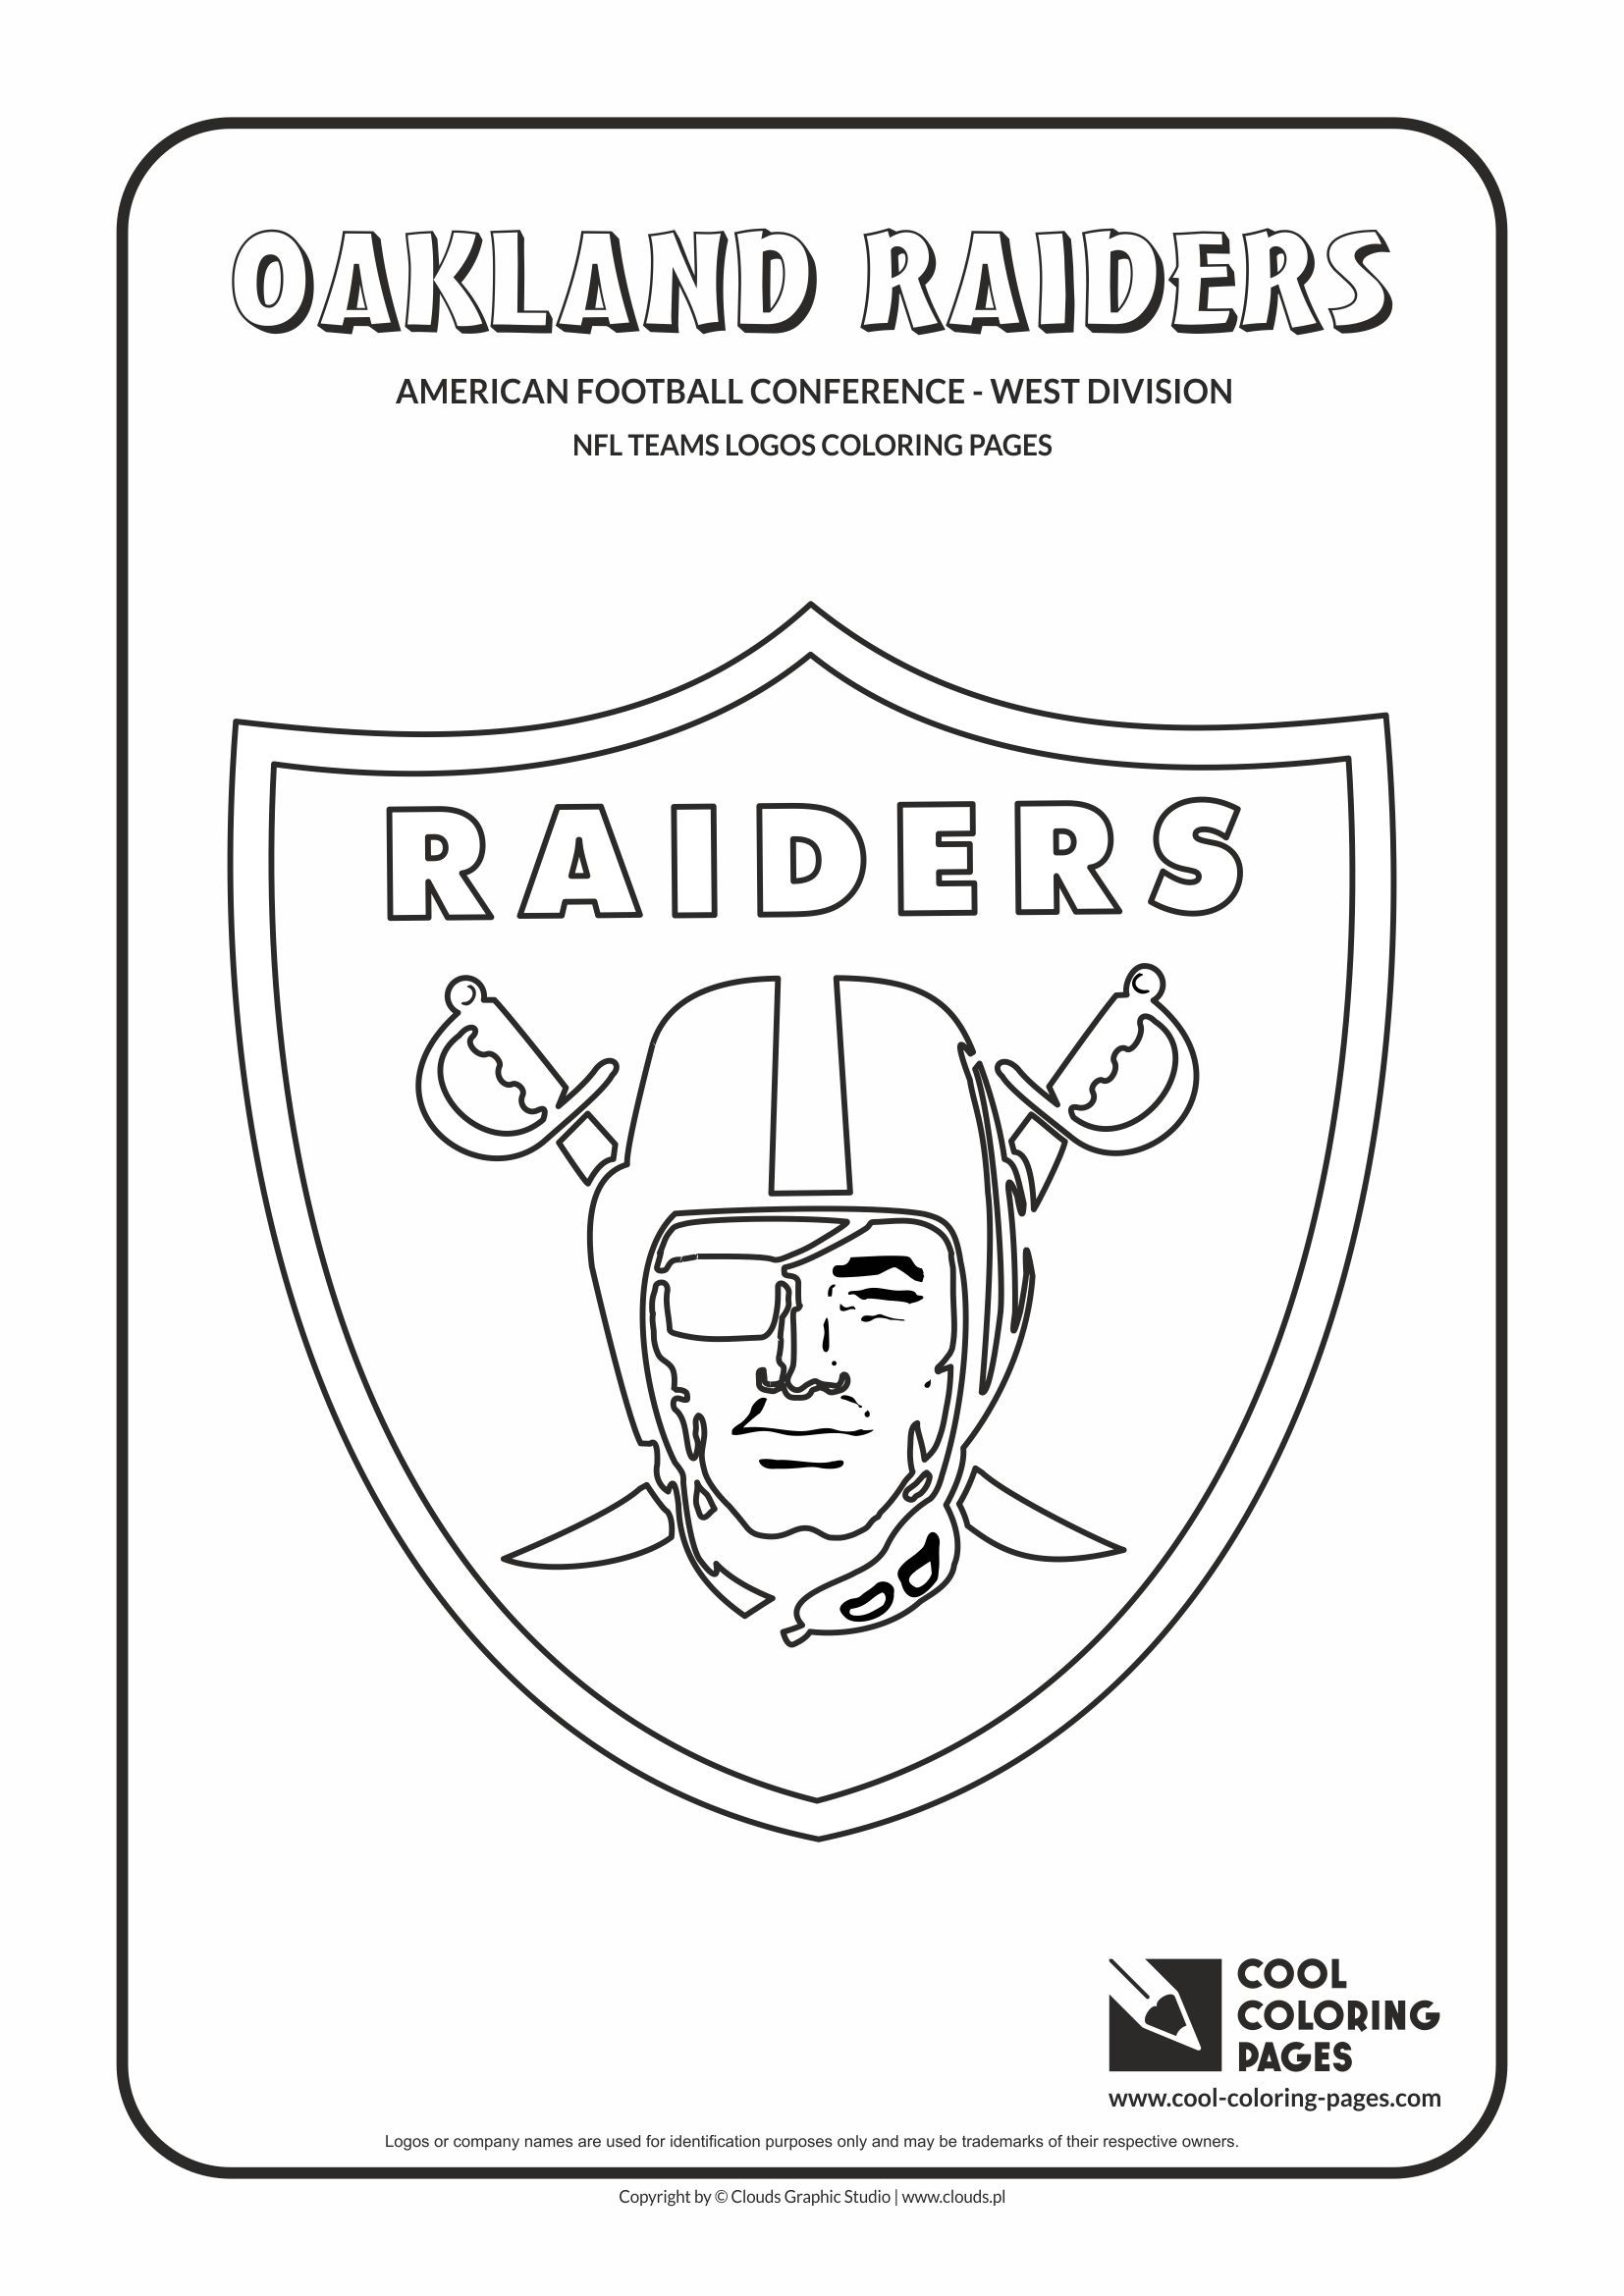 Nfl Logos Coloring Pages
 Cool Coloring Pages NFL teams logos coloring pages Cool